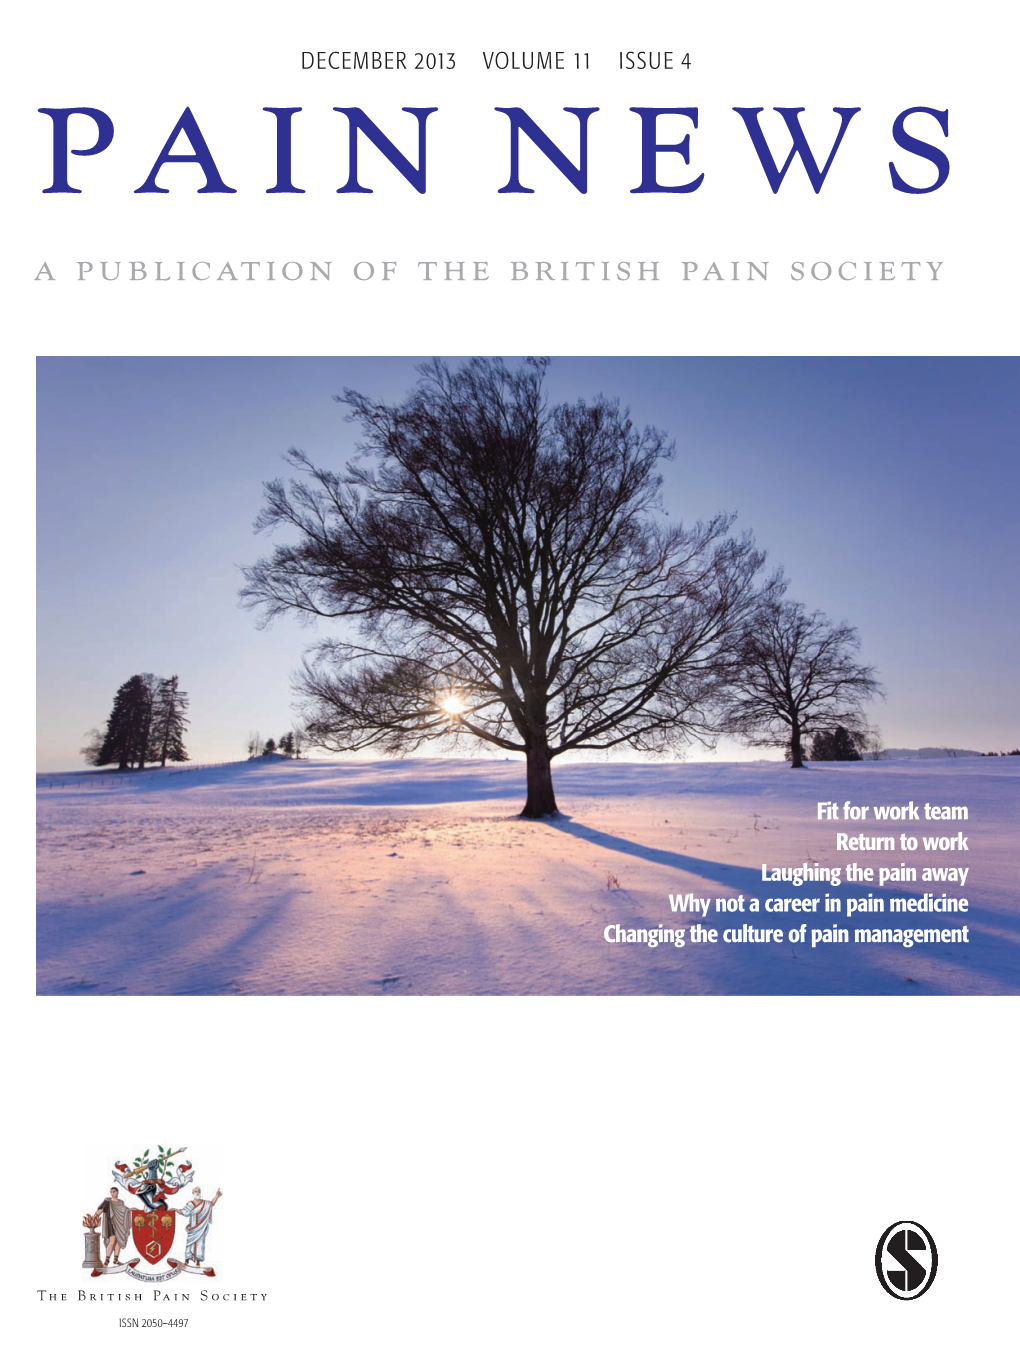 A Publication of the British Pain Society PAIN NEWS